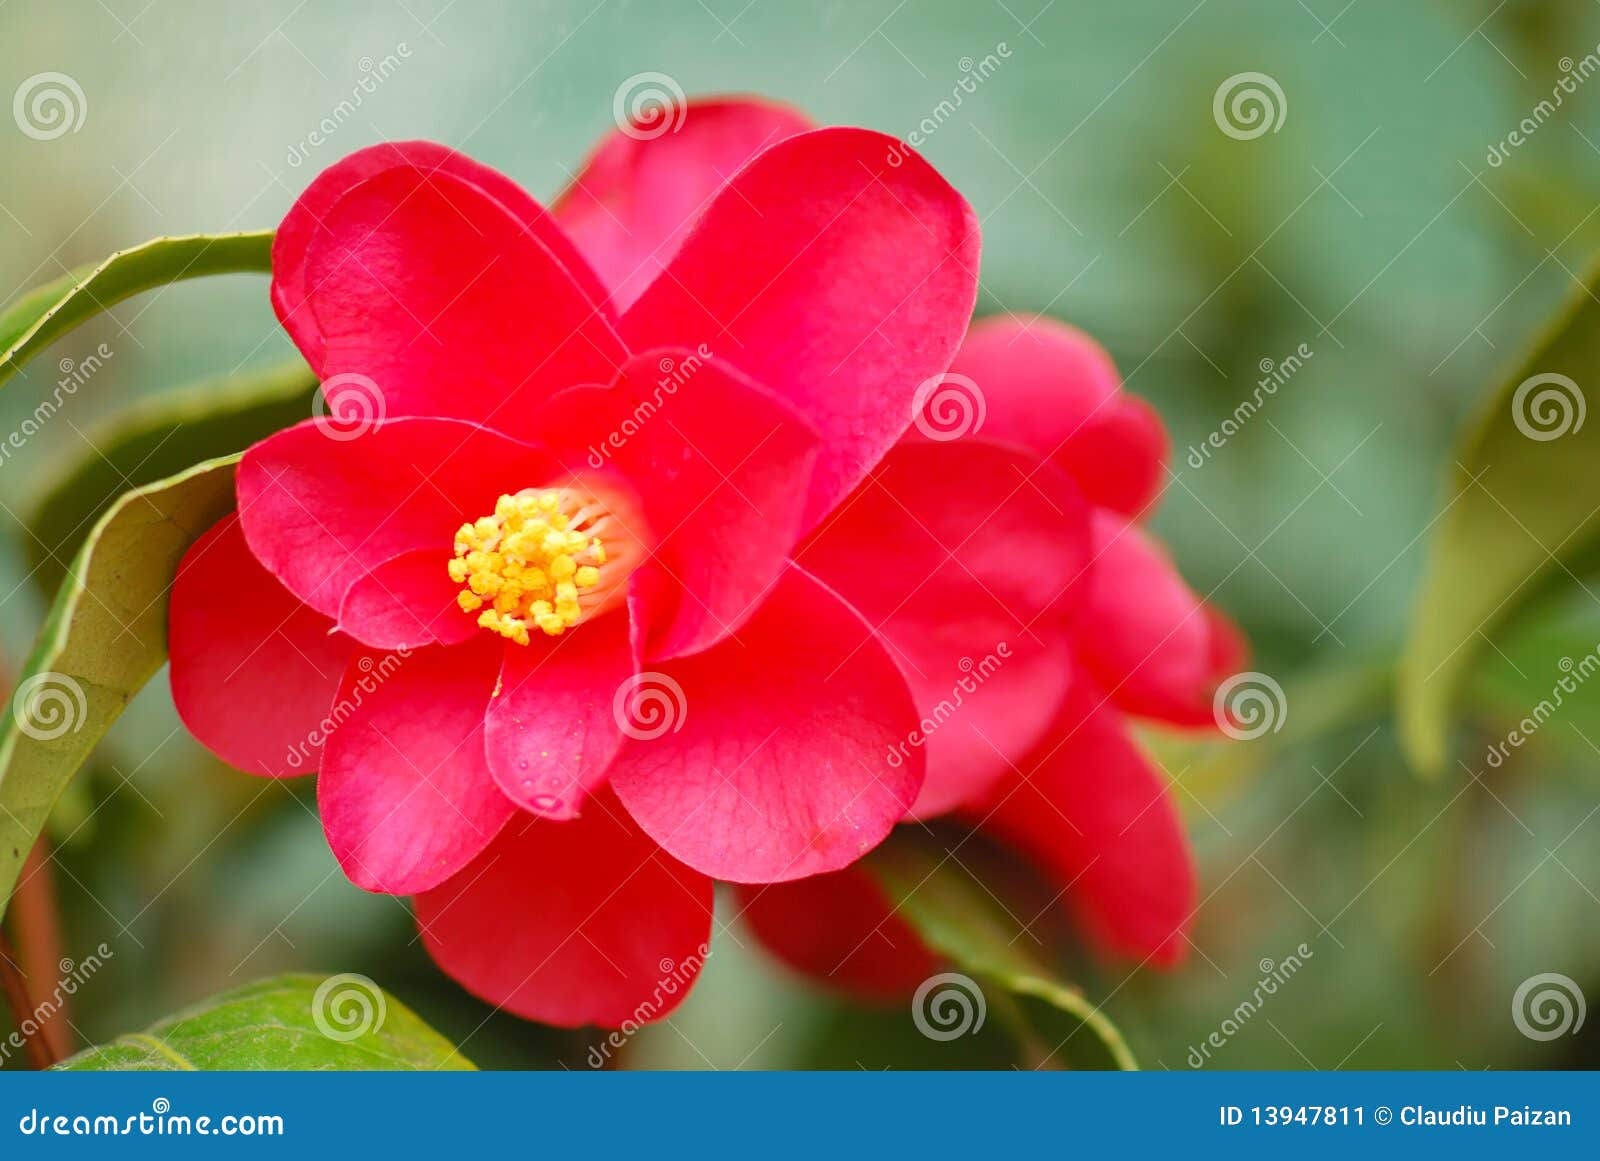 Camellia Japonica Stock Image Image Of Healthy Beautiful 13947811